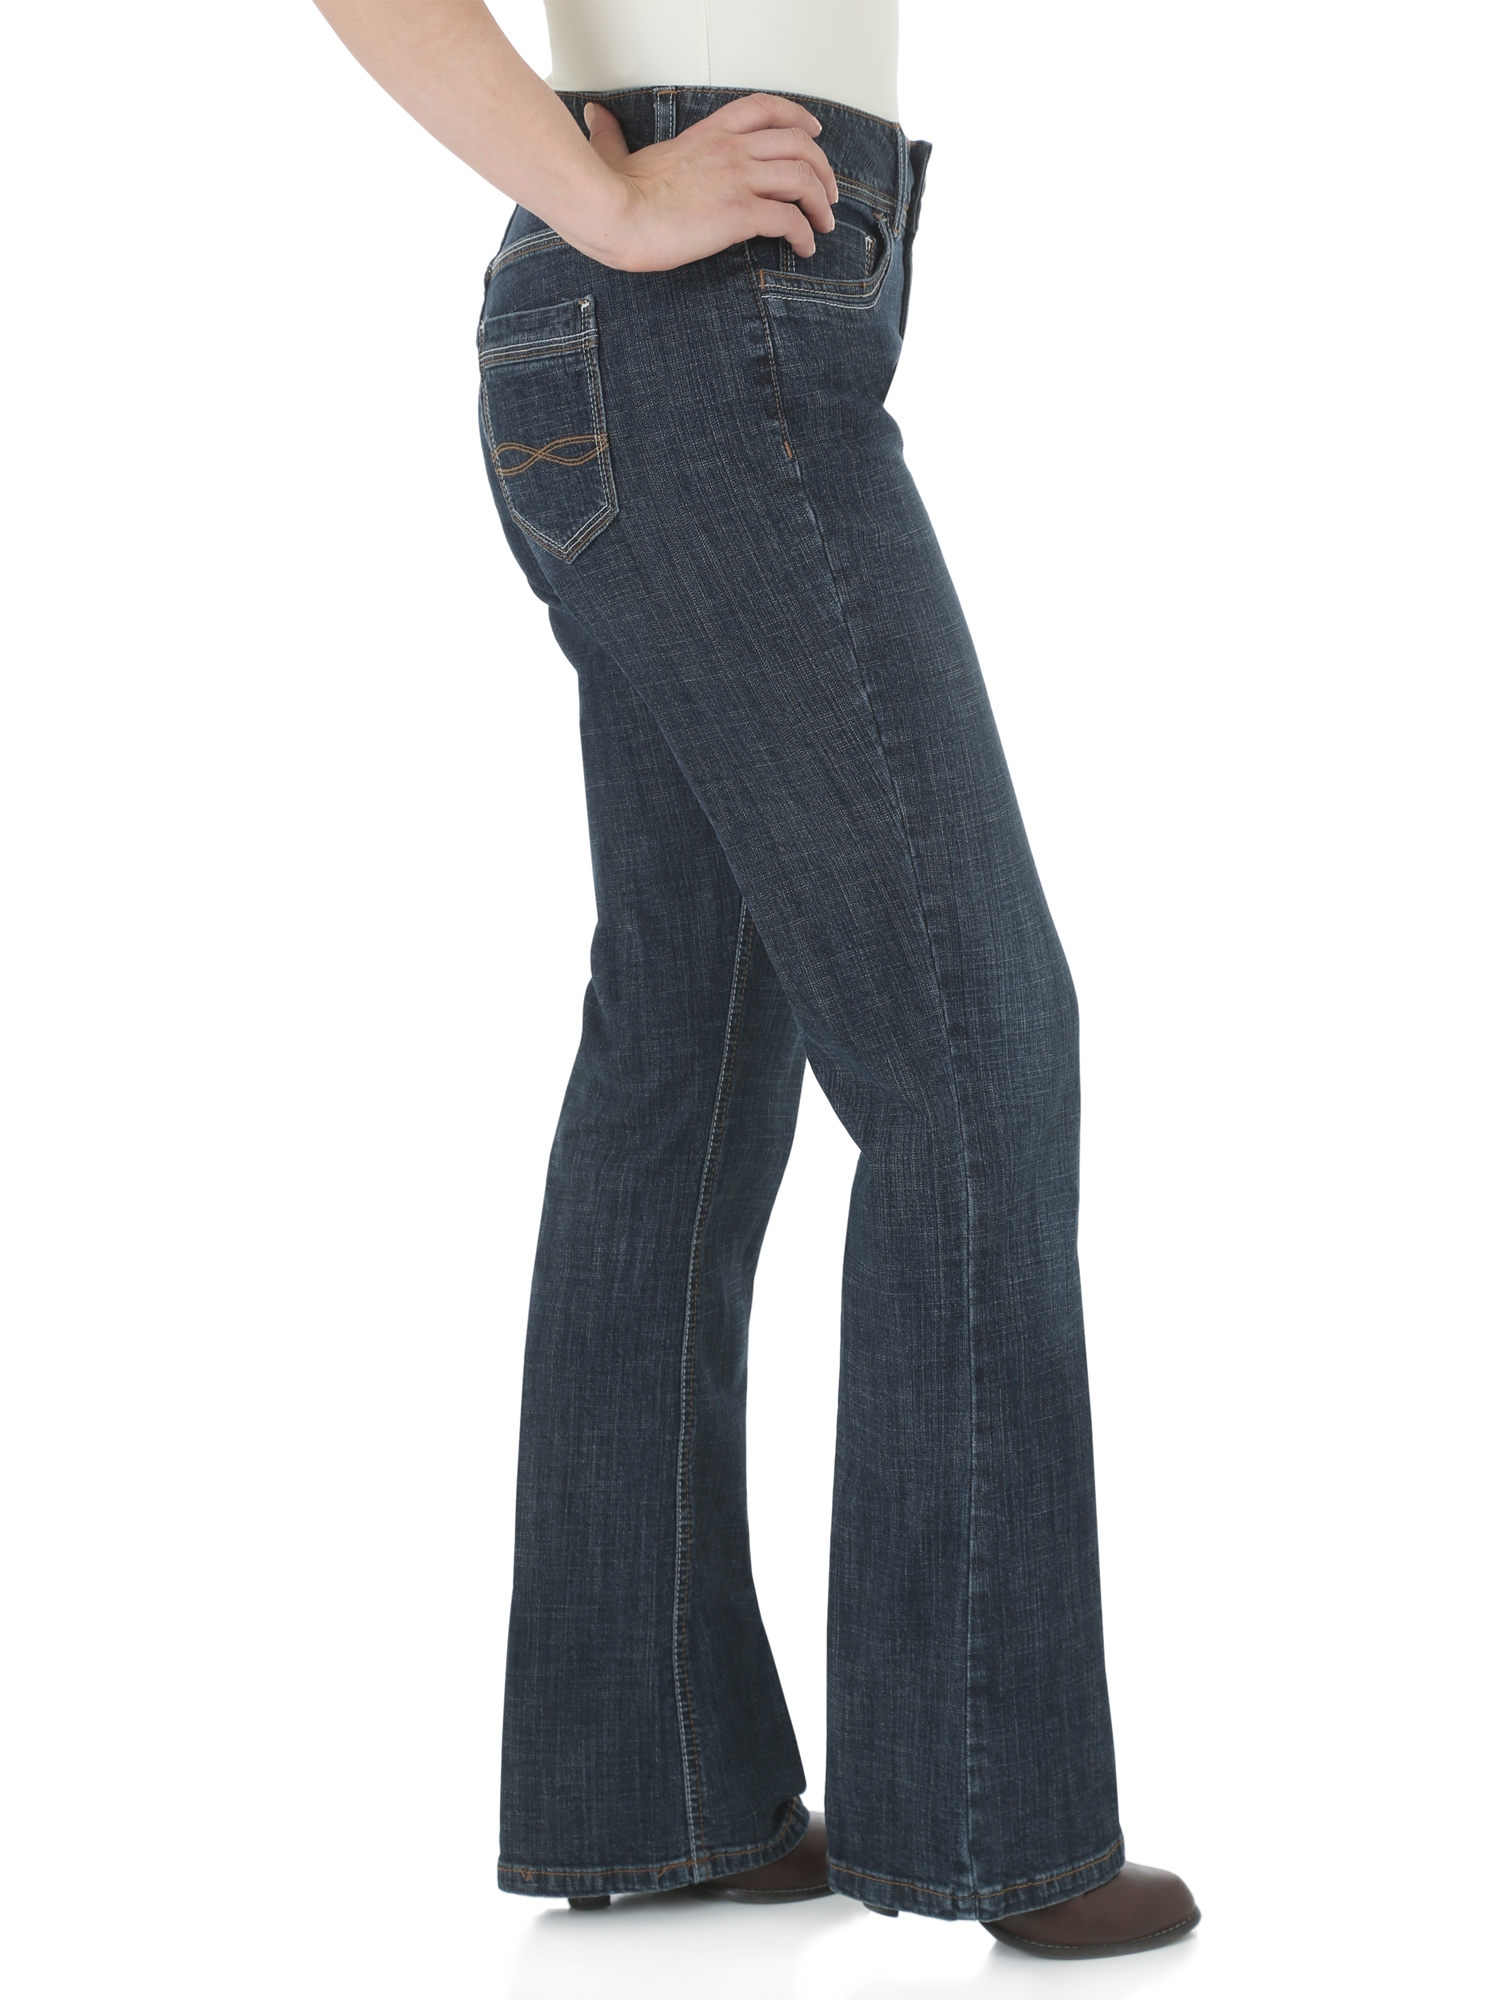 Women's Slender Stretch Bootcut Jean - image 2 of 3